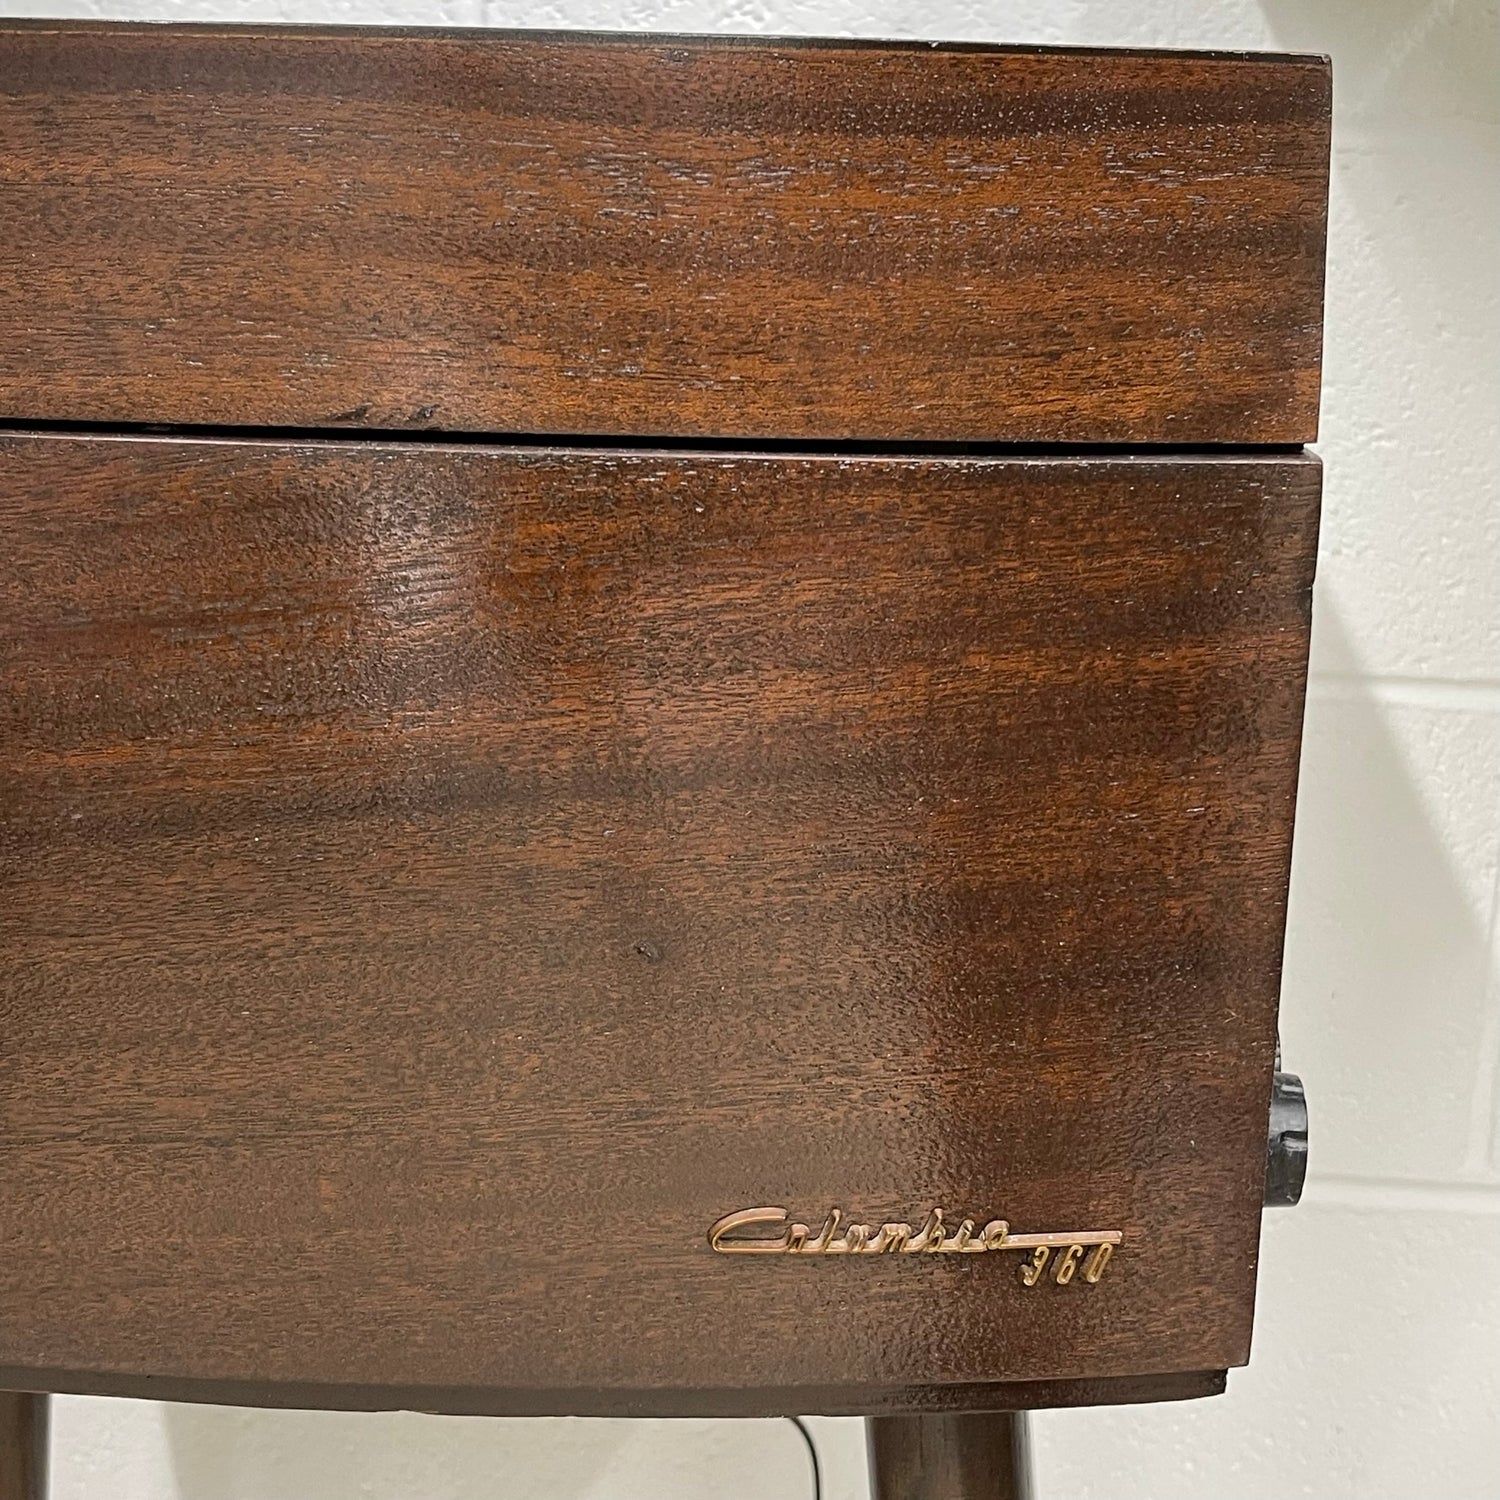 SOLD OUT!!! COLUMBIA 360 Mid Century Vintage Record Player Changer The Vintedge Co.